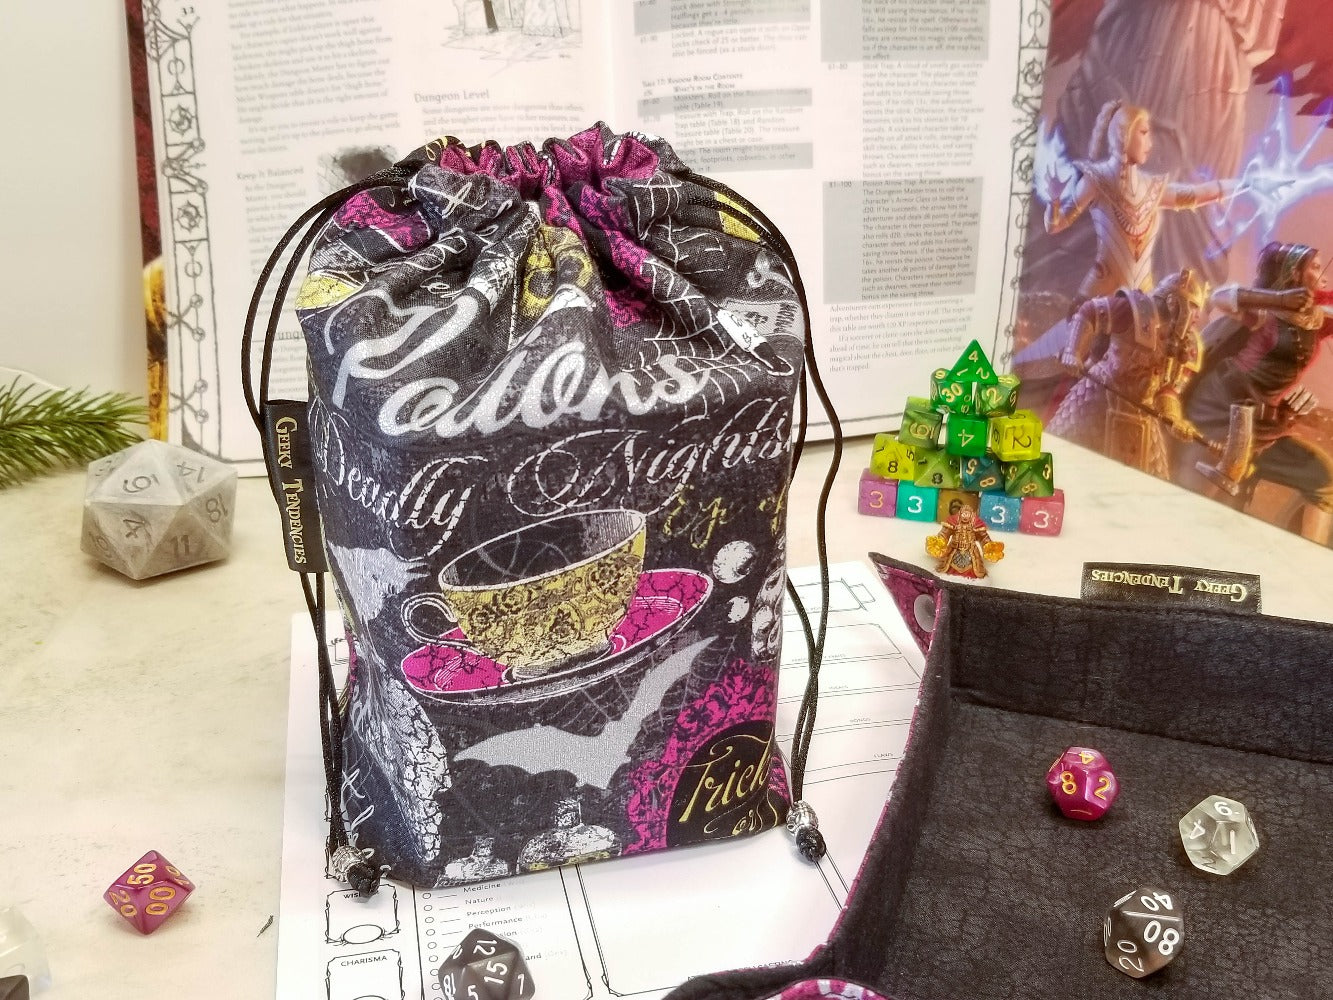 Halloween potions dice bag. Halloween print in black, metallic silver and purple with pops of gold